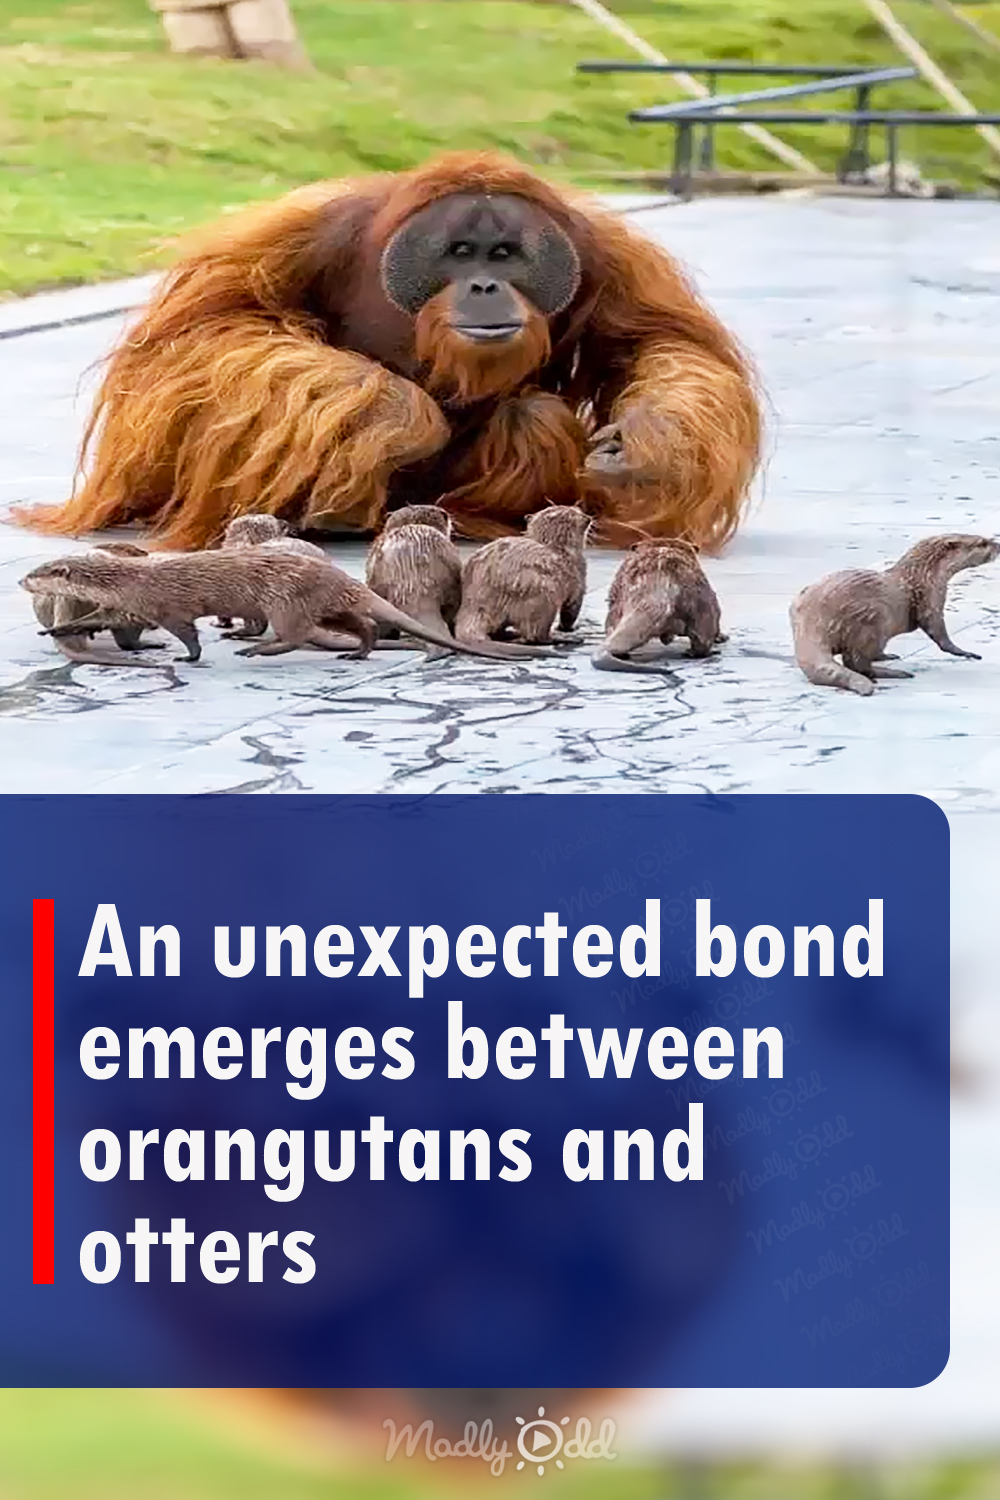 An unexpected bond emerges between orangutans and otters